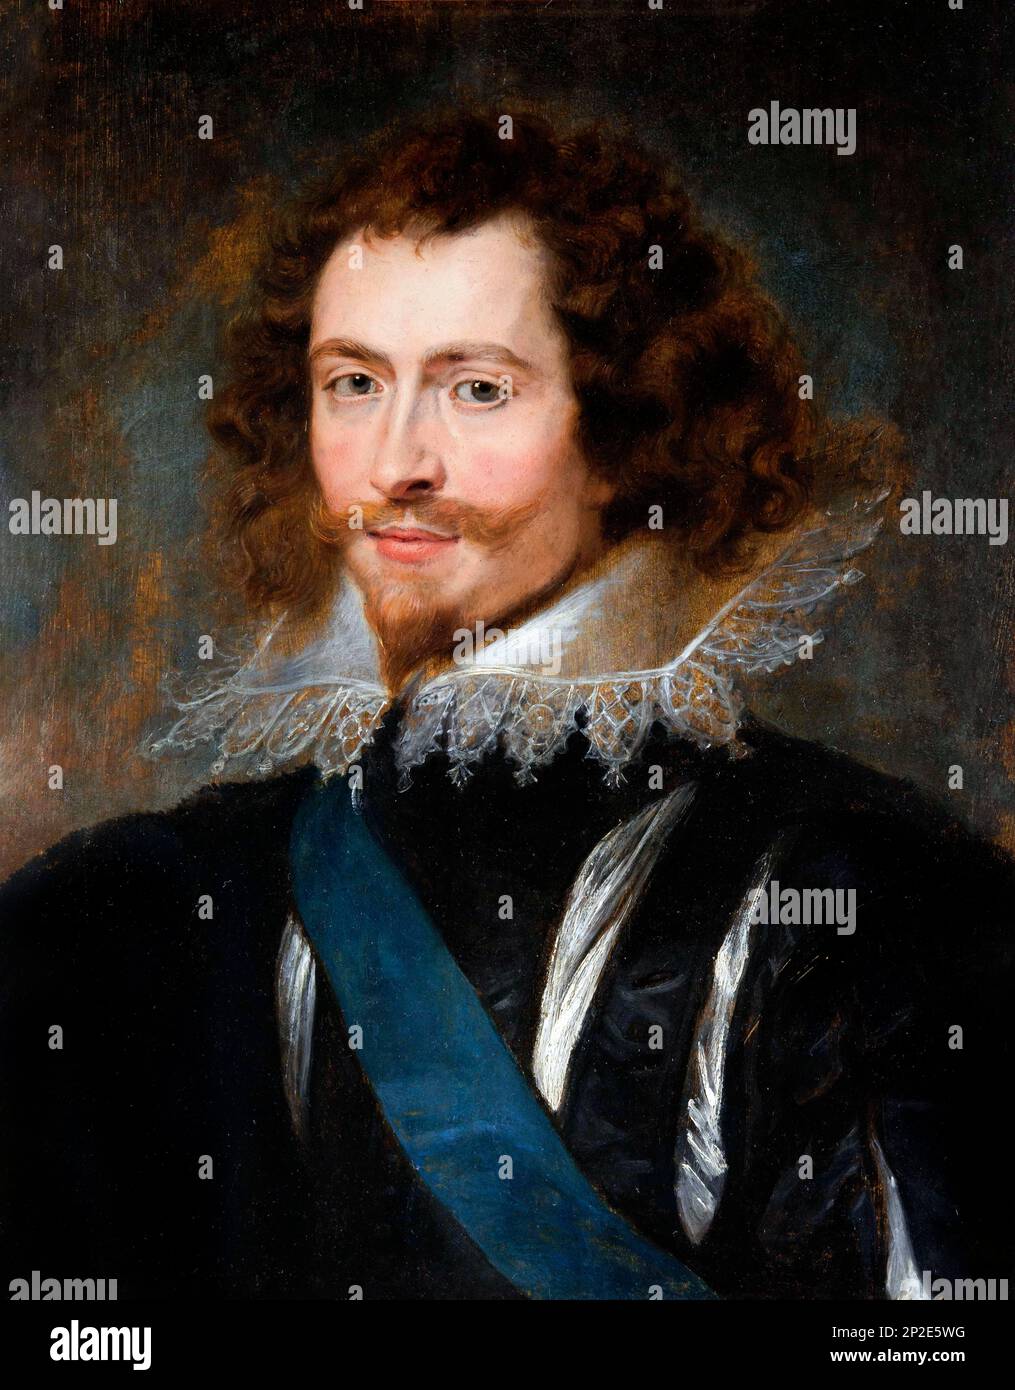 Portrait of George Villiers, 1st Duke of Buckingham (1592-1628) by Peter Paul Rubens, oil on panel, c. 1617-28. Buckingham was a favourite of King James VI and I and reputed to have been his lover. Stock Photo